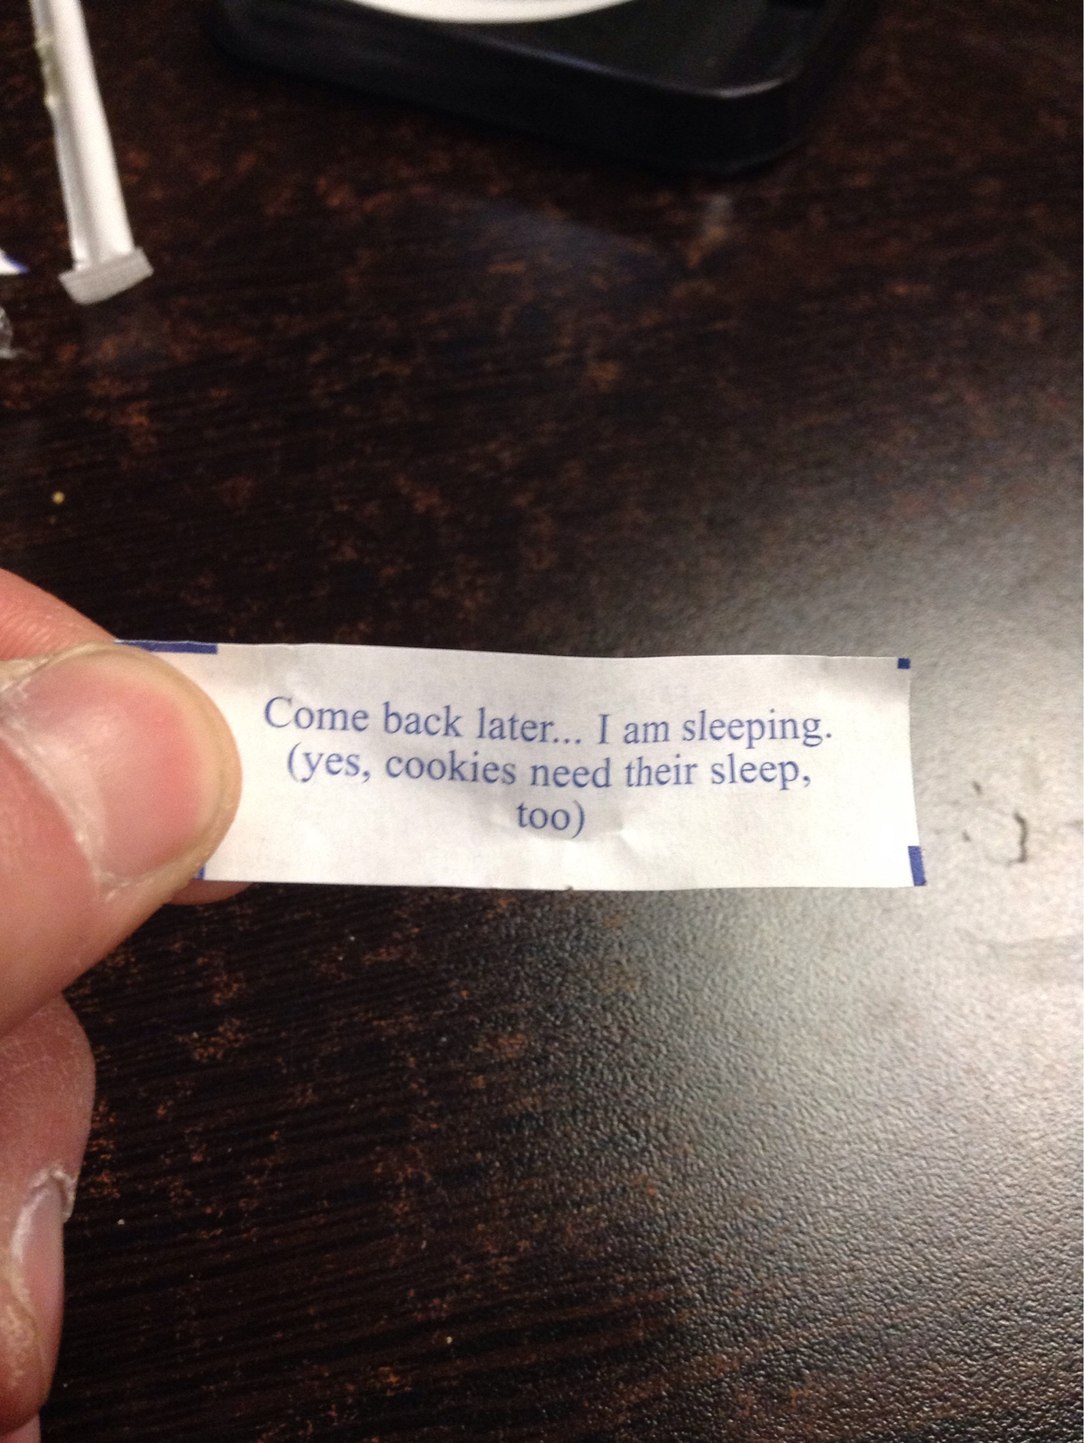 Ask not what your fortune cookie can do for you, but what you can do for your fortune cookie. - meme